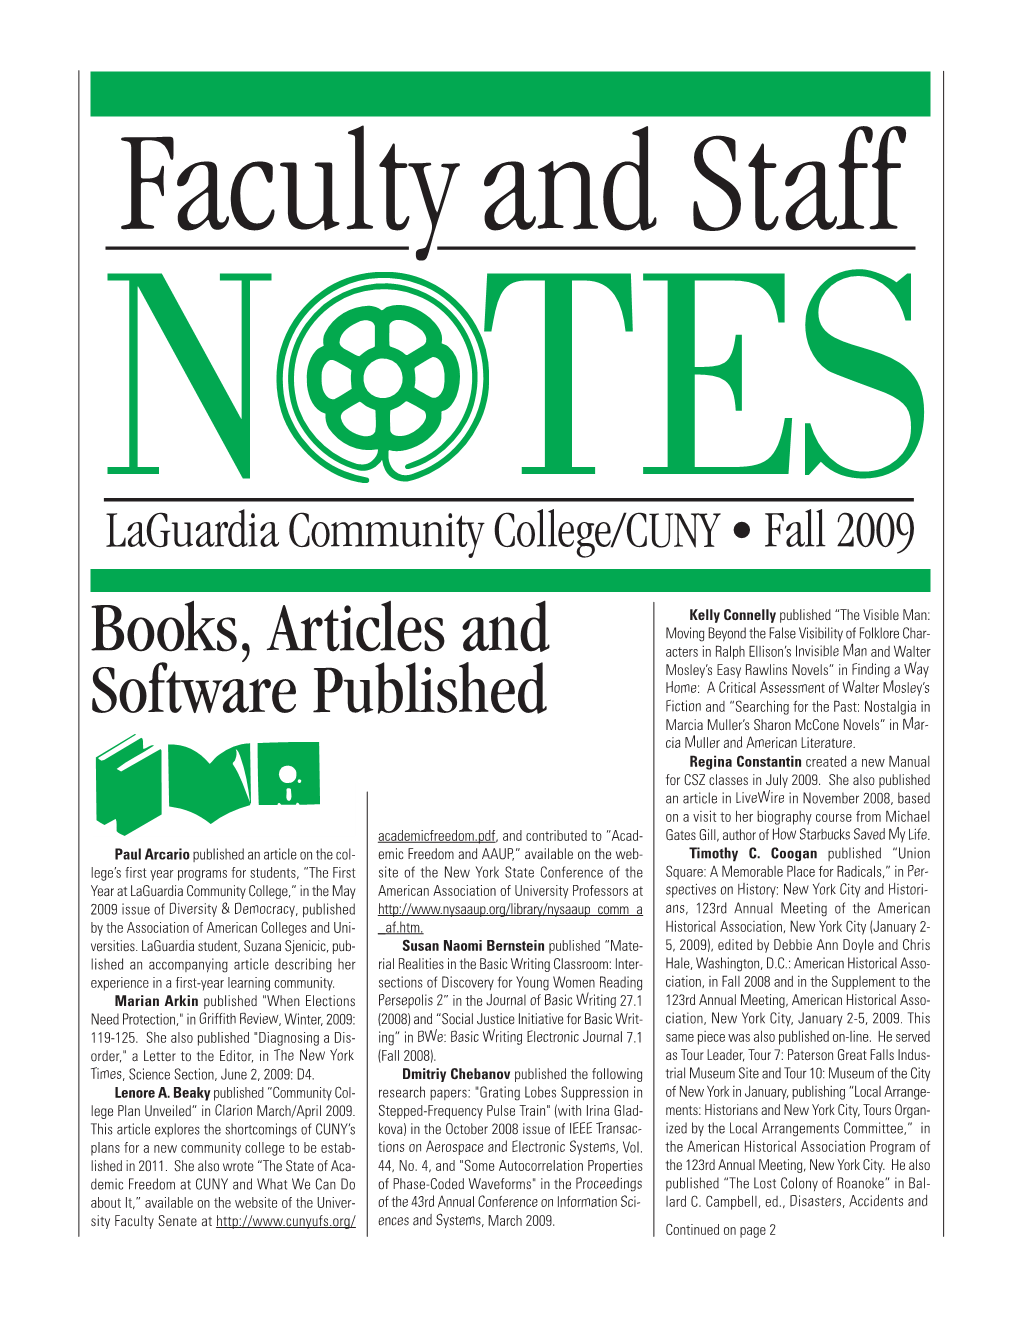 F&S Notes Fall 06 1